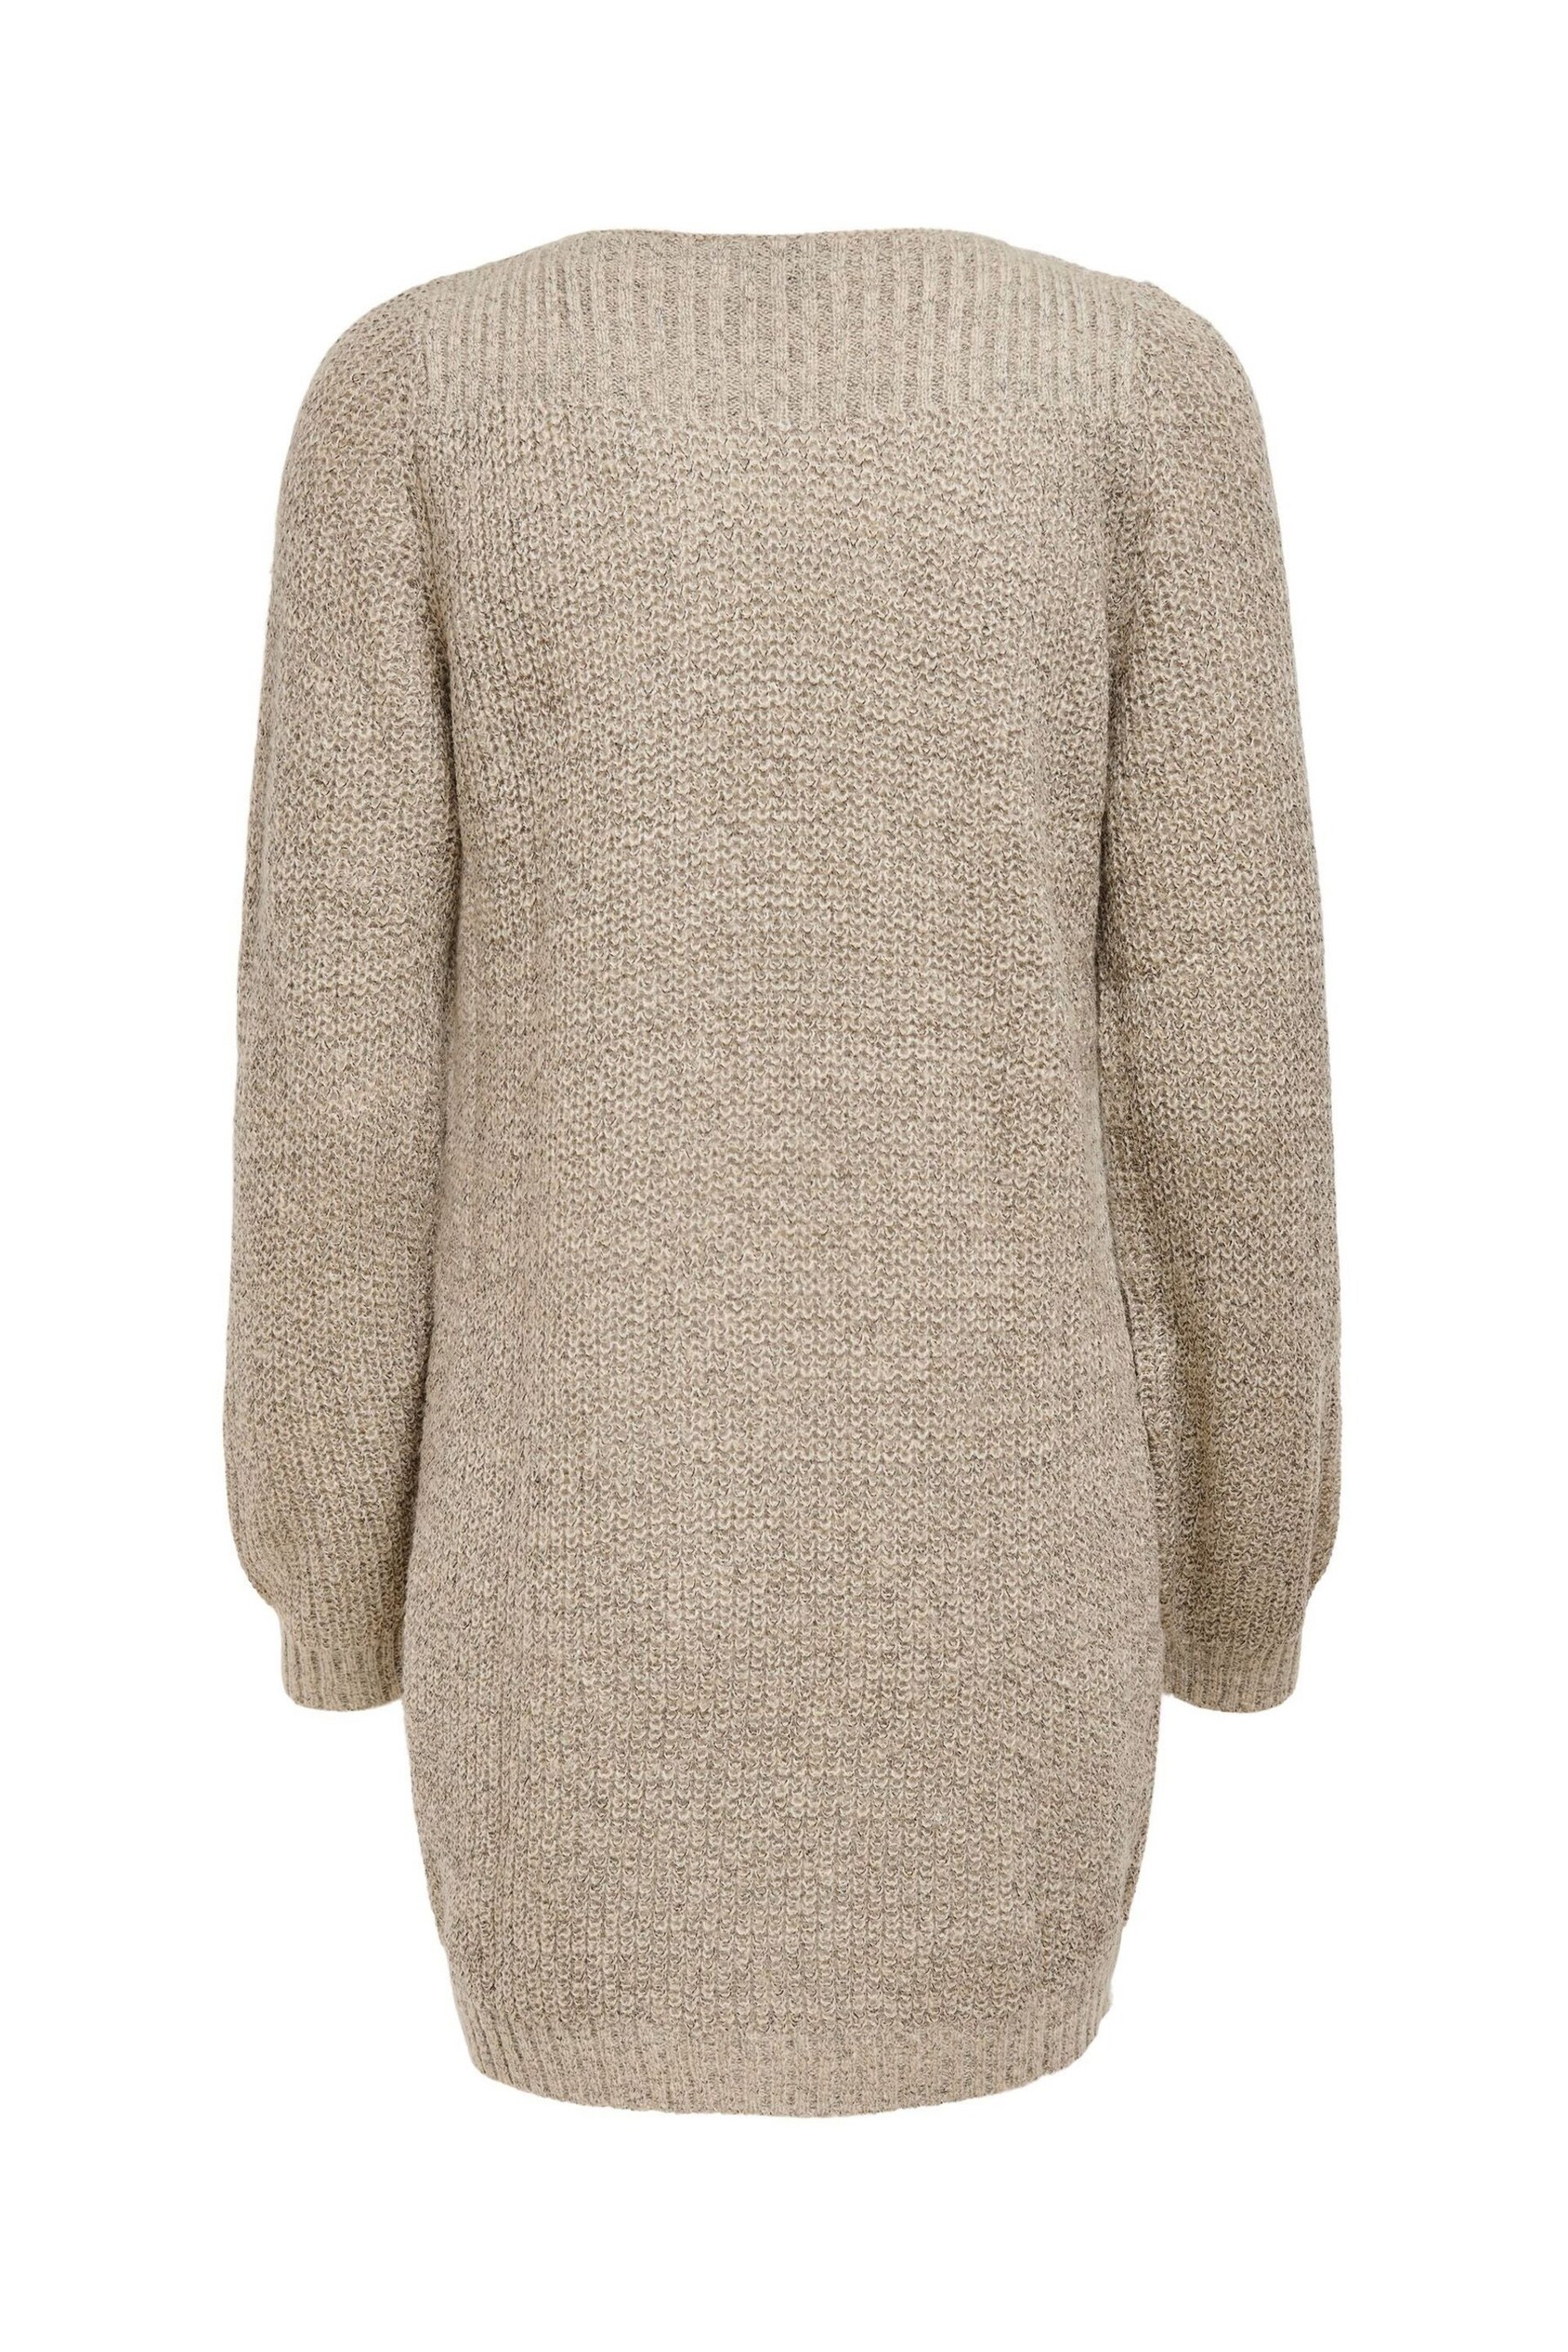 JDY Natural Knitted Dress - Image 6 of 7